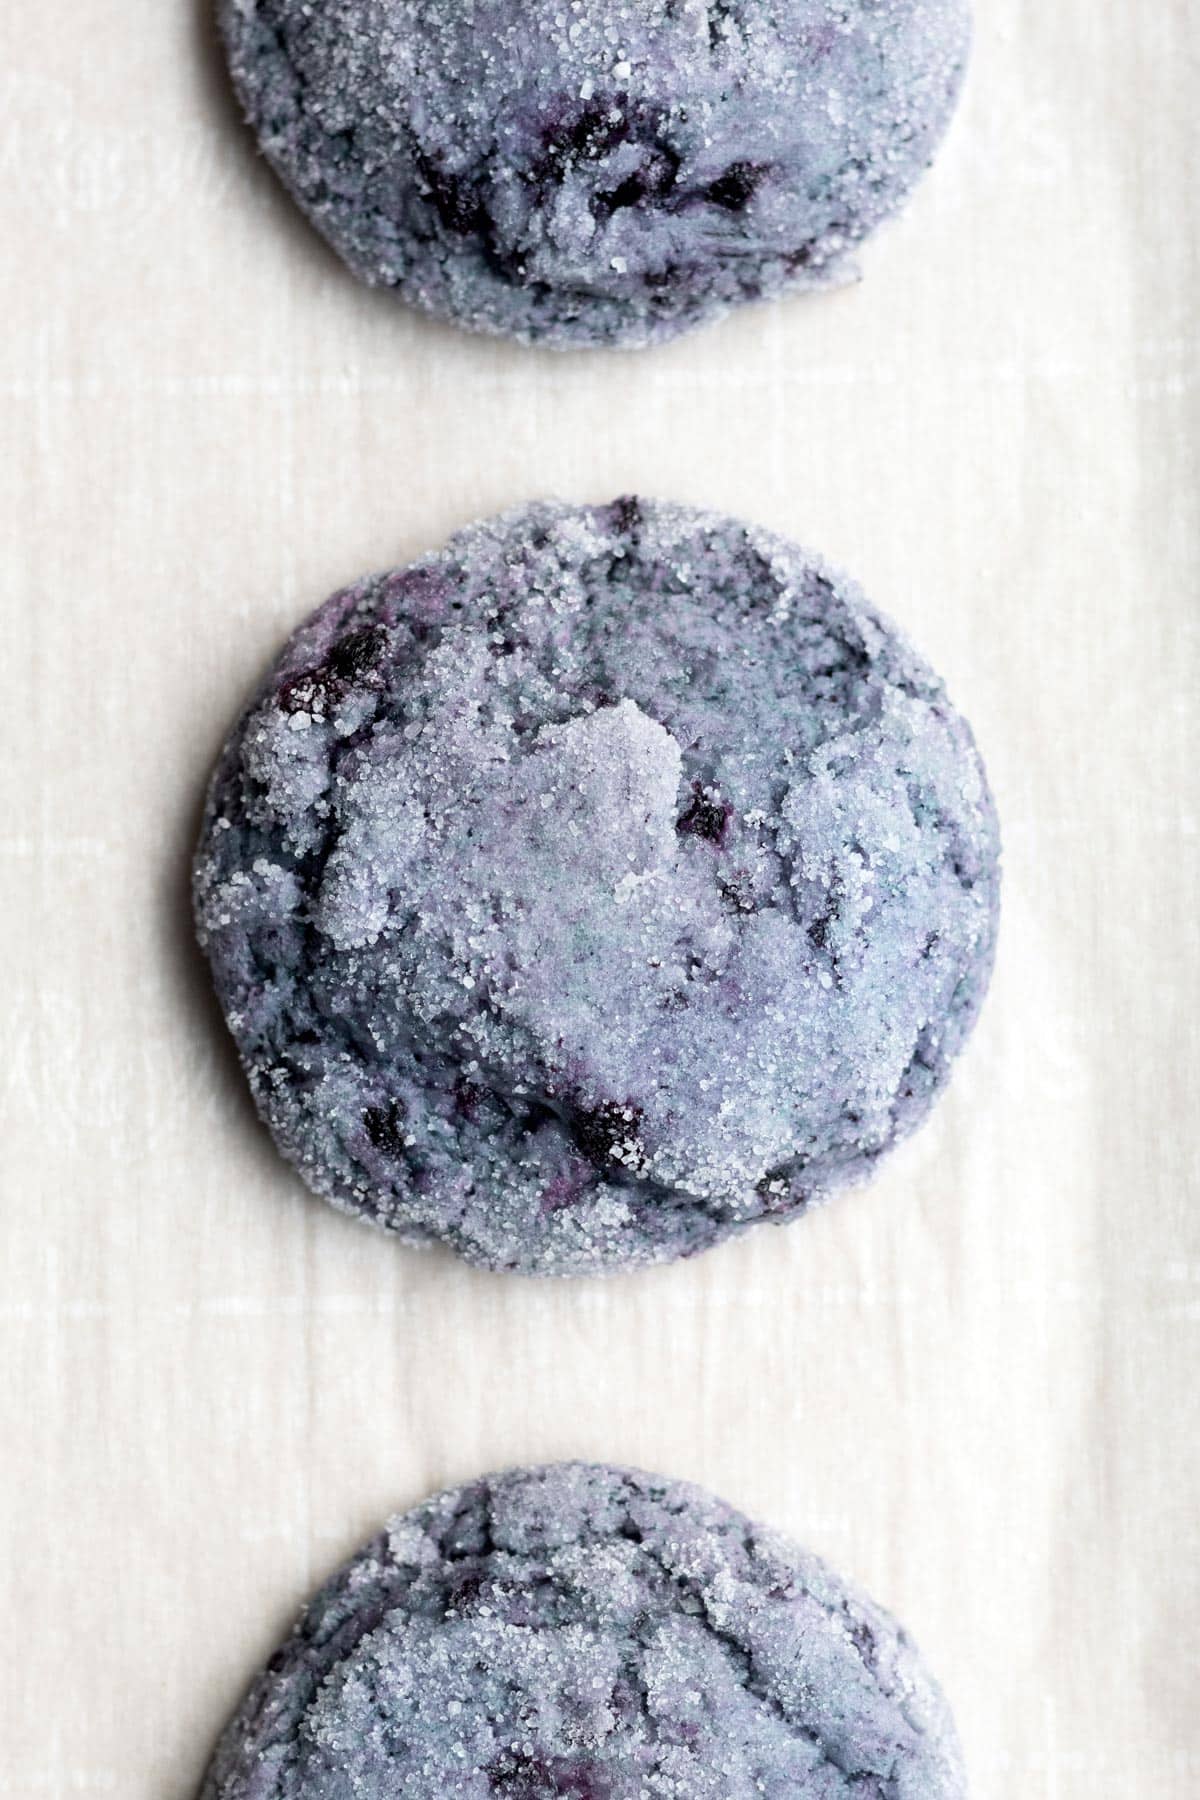 Baked and fresh Blueberry Cookies on parchment paper.